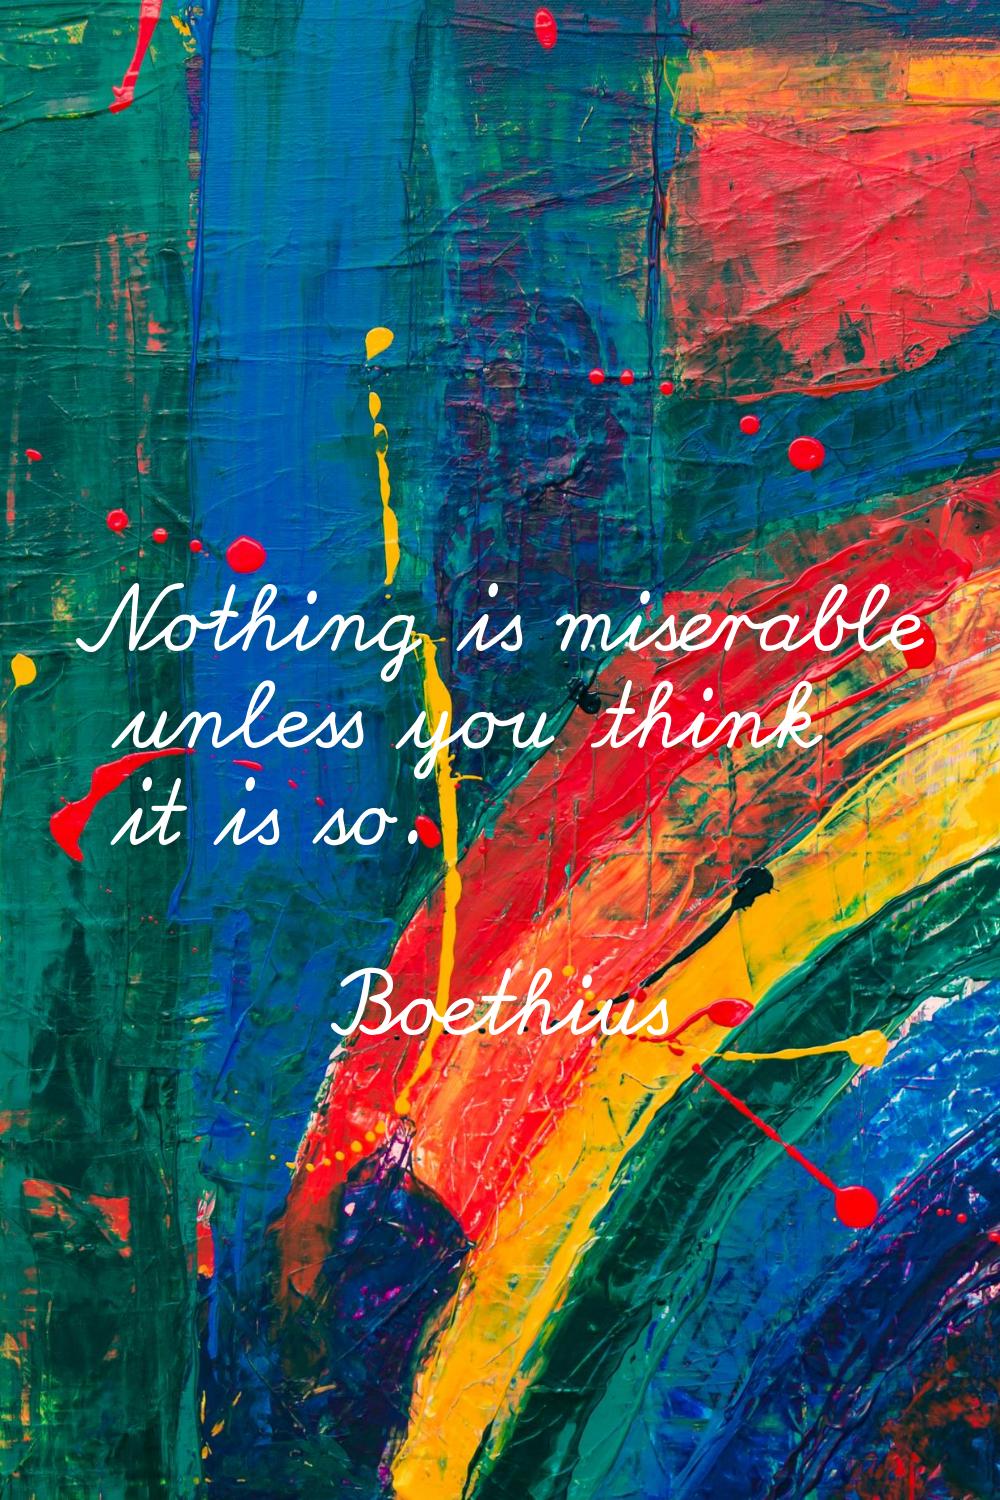 Nothing is miserable unless you think it is so.